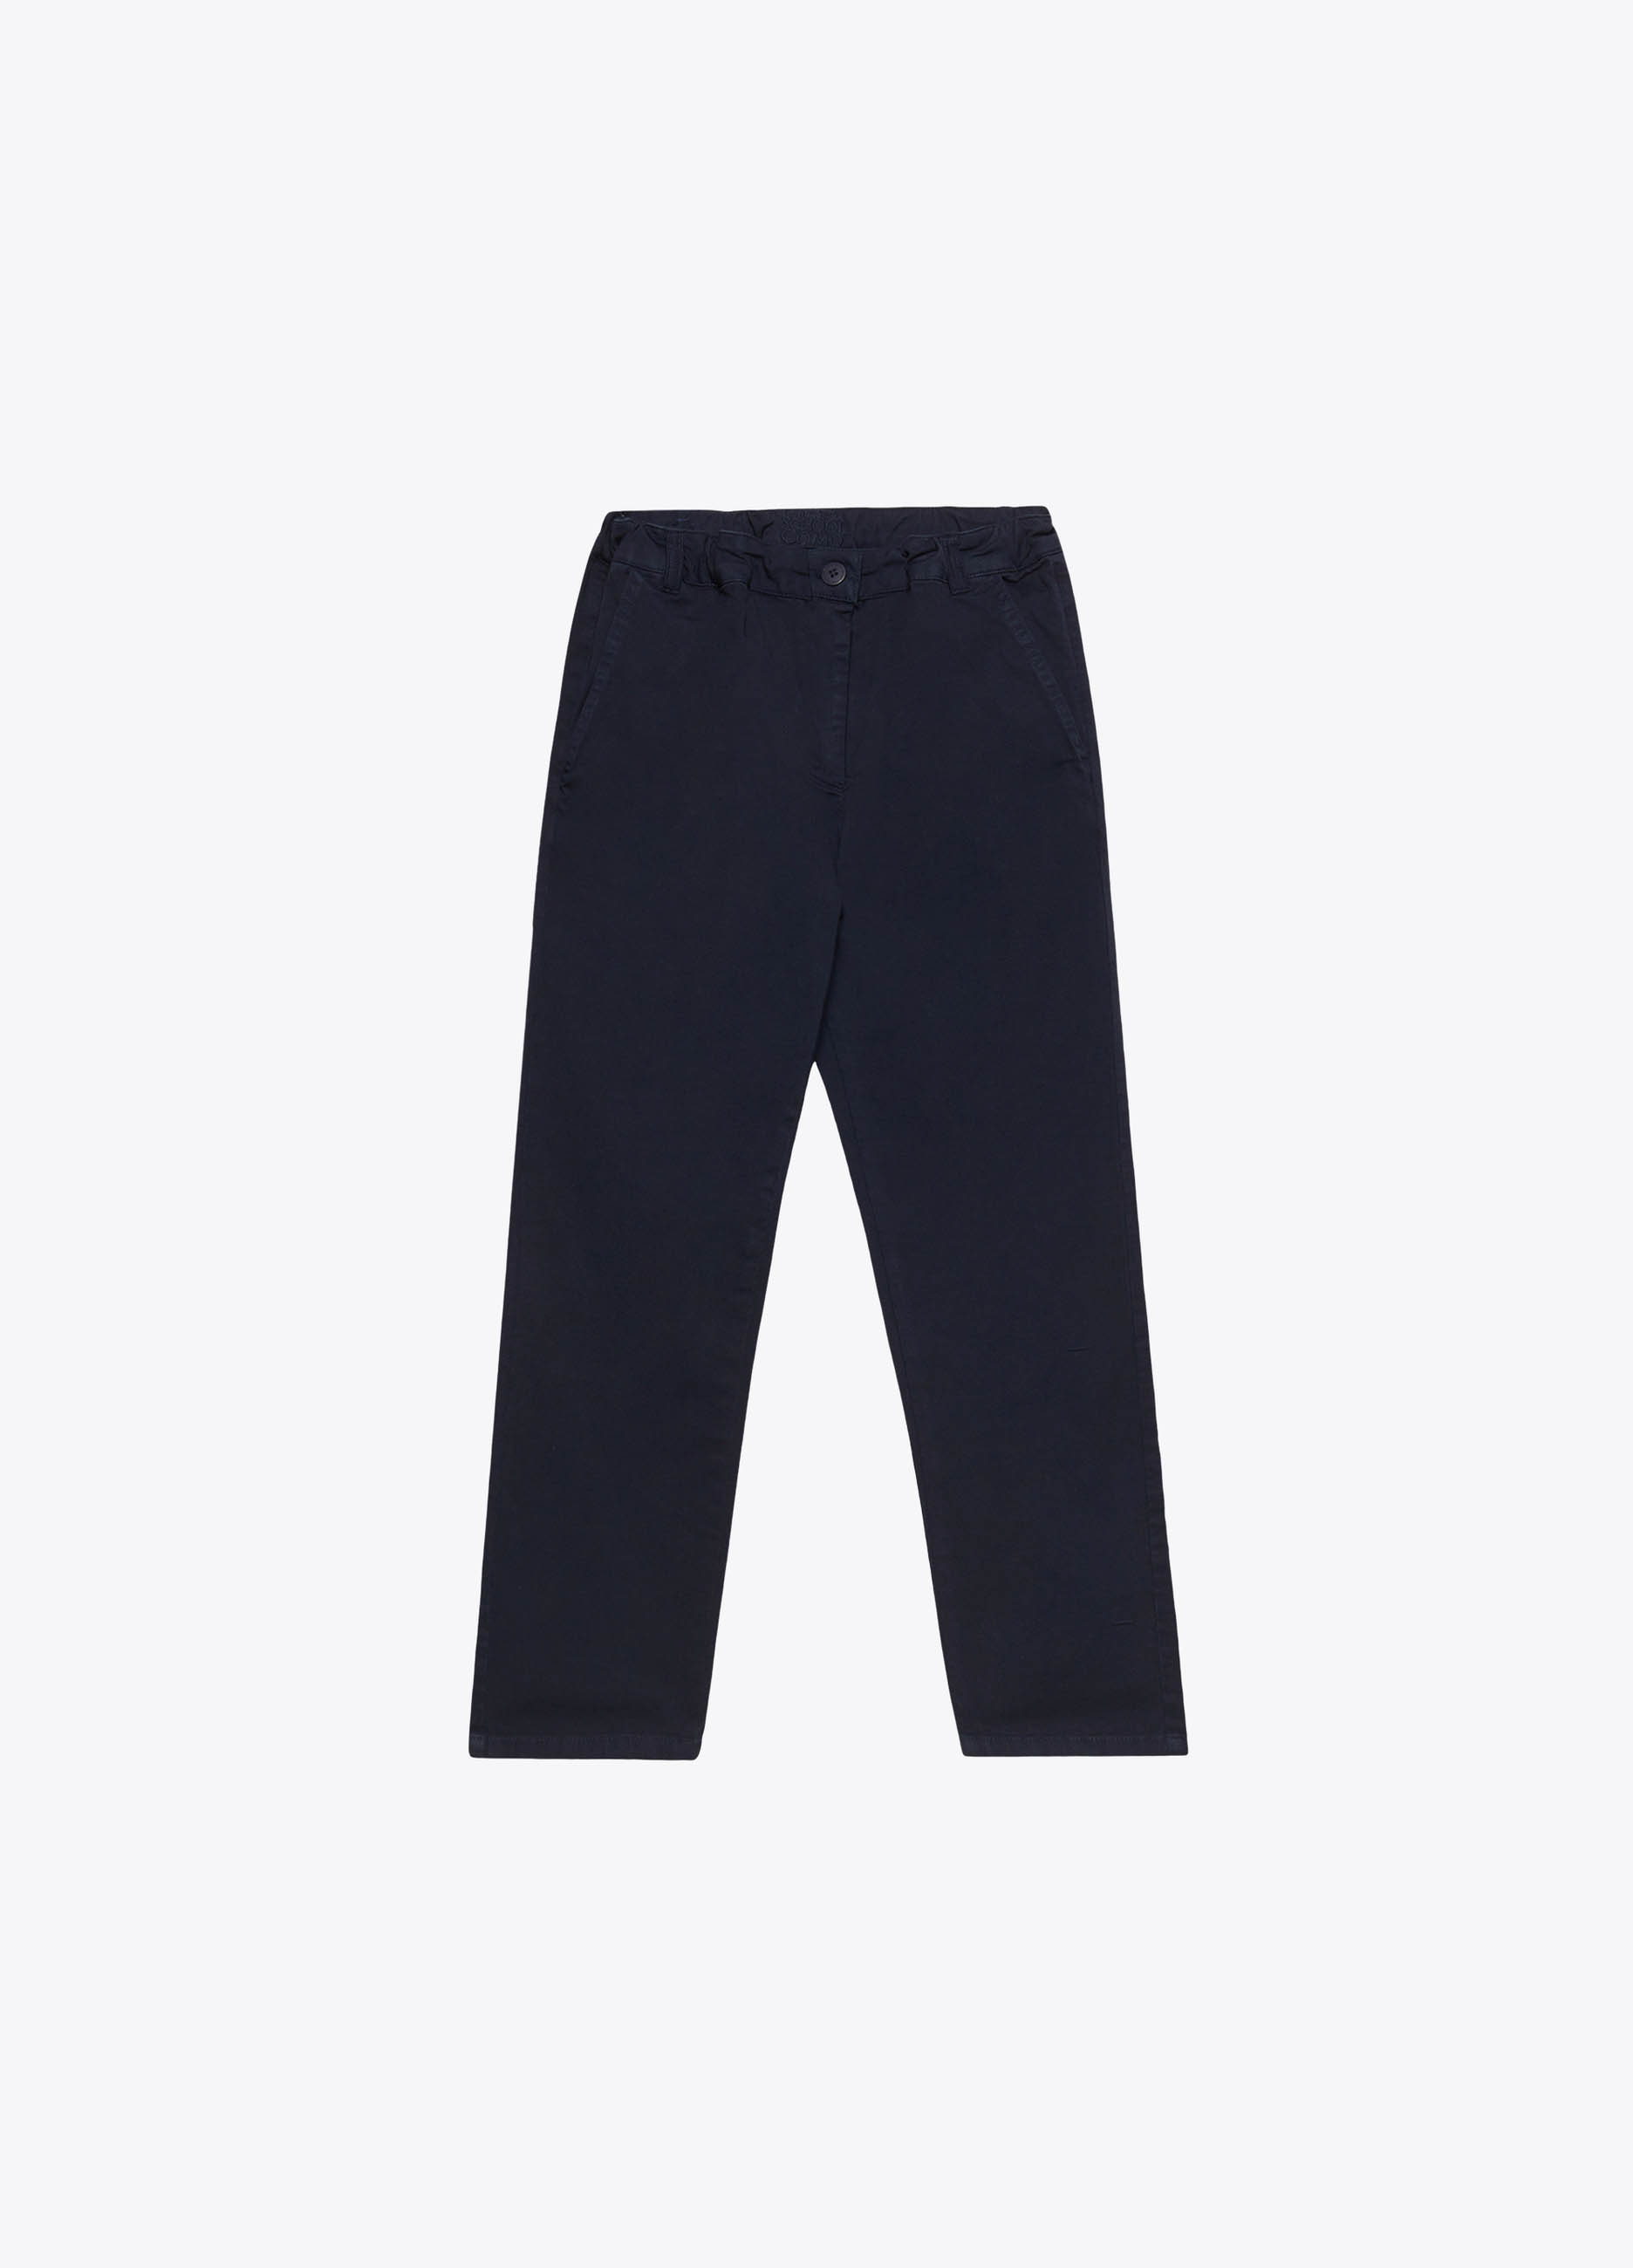 GIRL - Stretch cotton twill trousers.